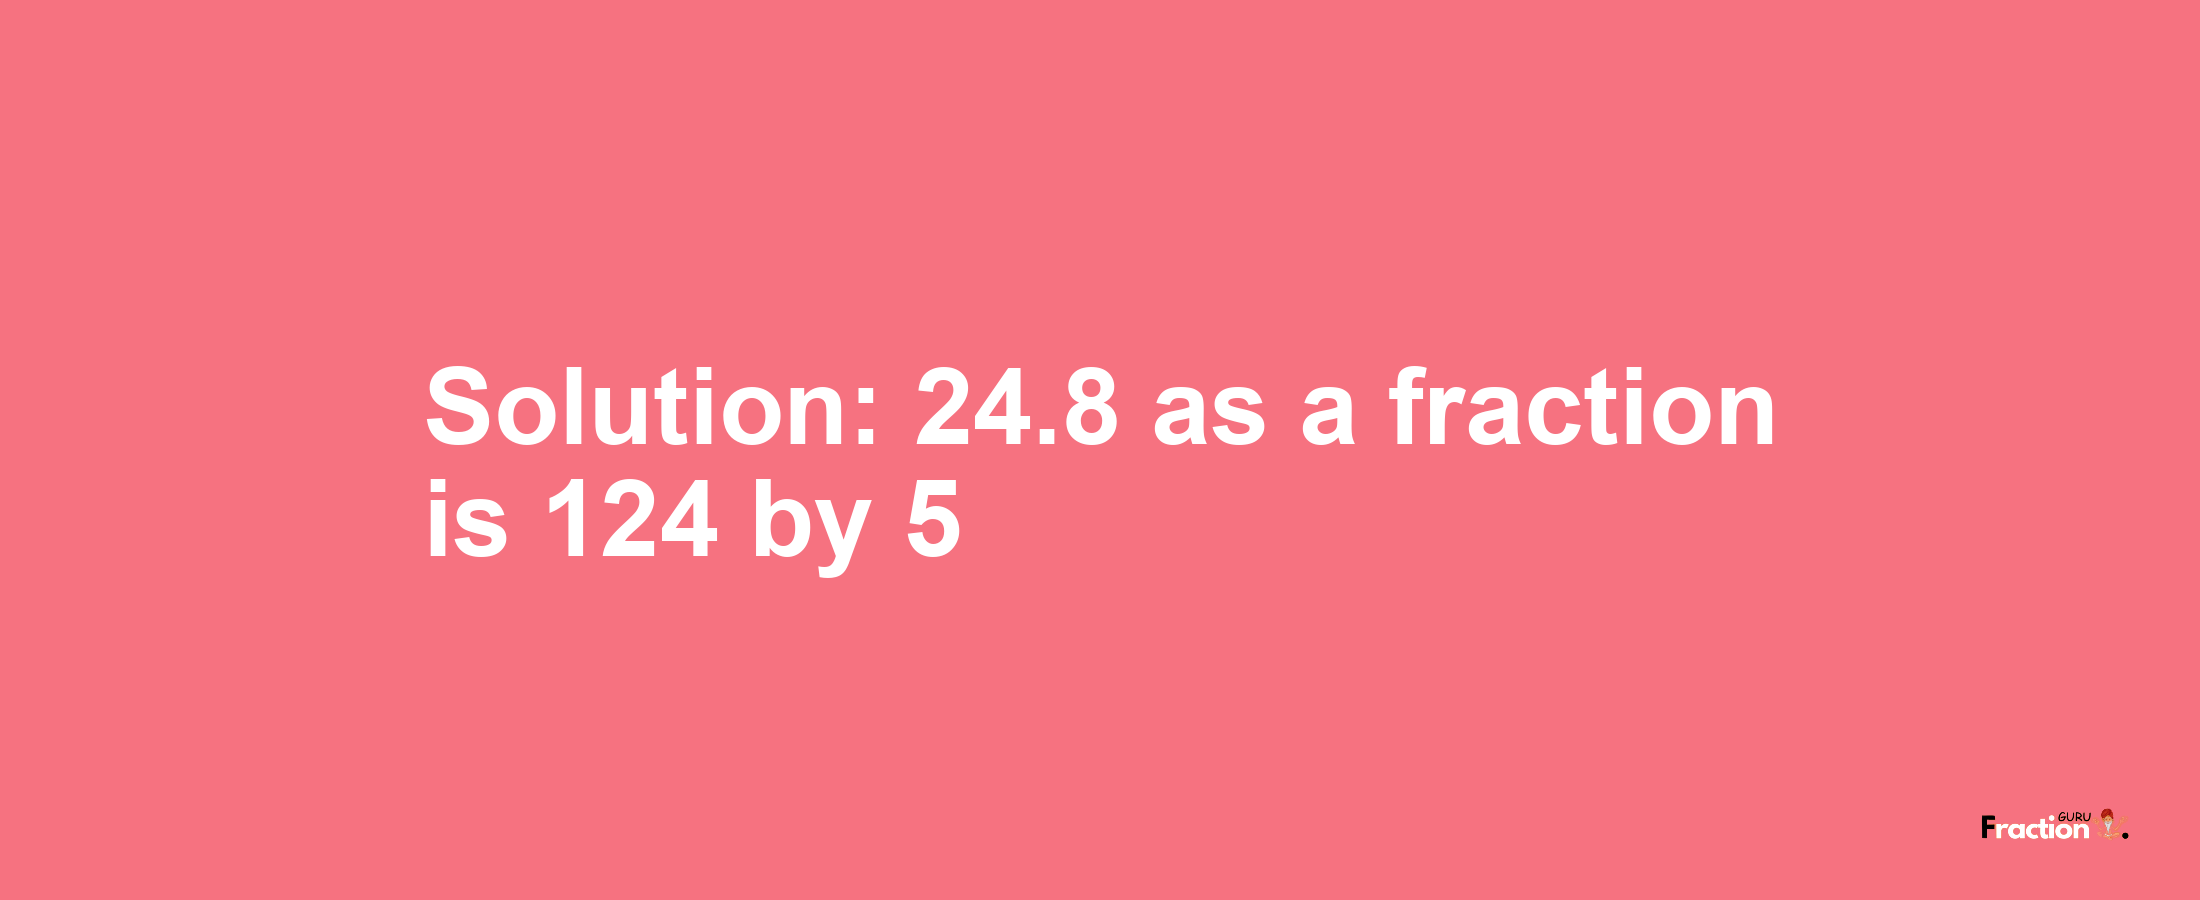 Solution:24.8 as a fraction is 124/5